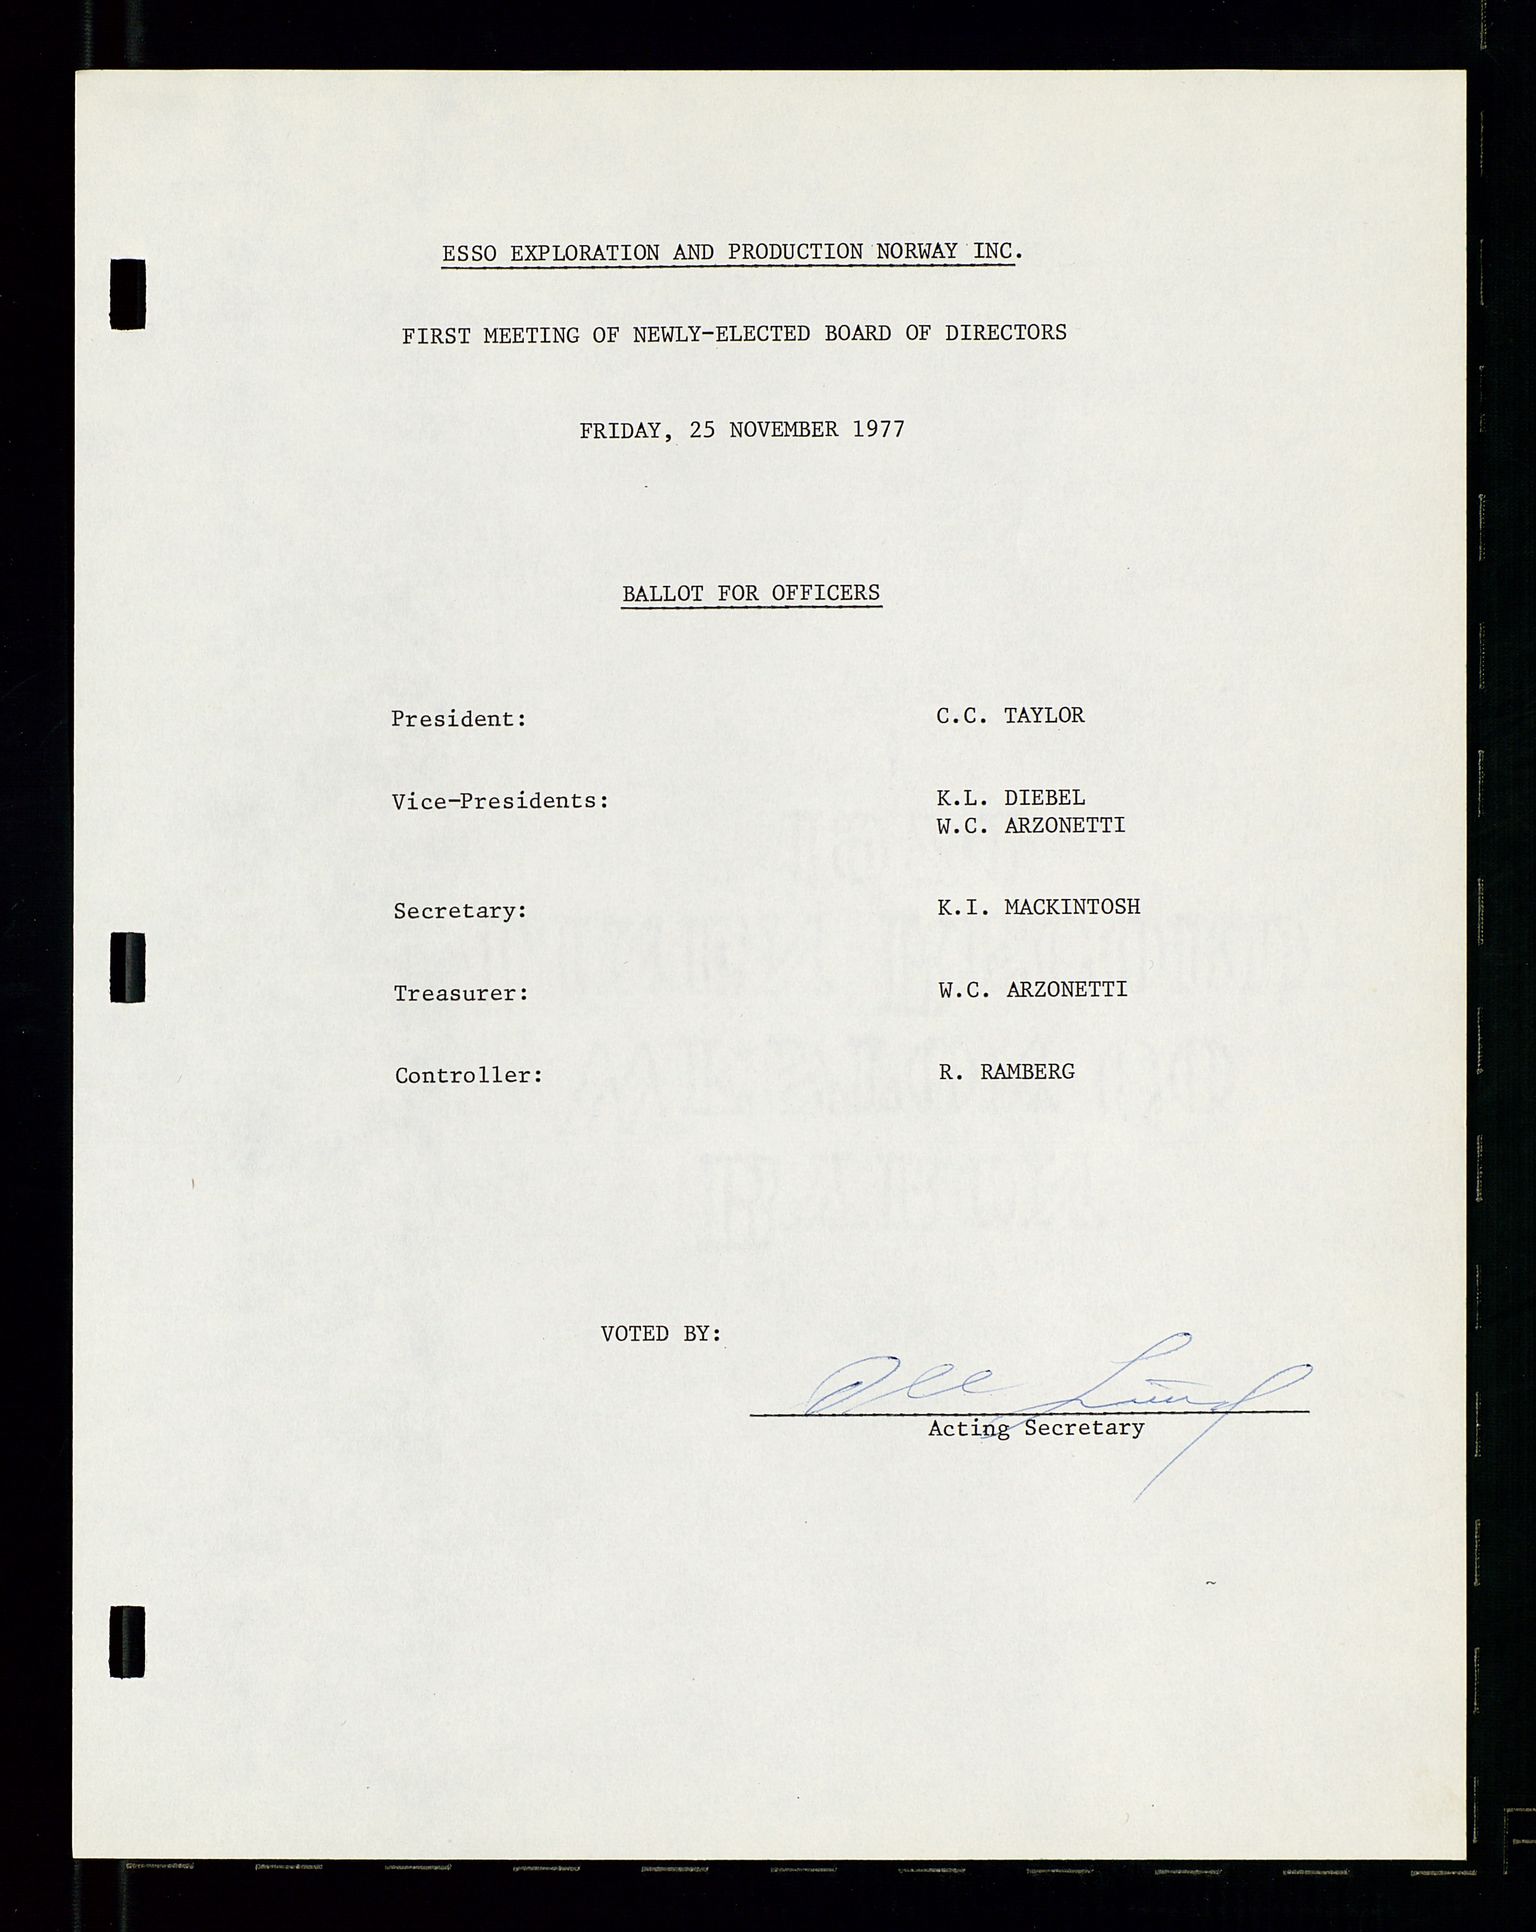 Pa 1512 - Esso Exploration and Production Norway Inc., SAST/A-101917/A/Aa/L0001/0002: Styredokumenter / Corporate records, Board meeting minutes, Agreements, Stocholder meetings, 1975-1979, s. 76